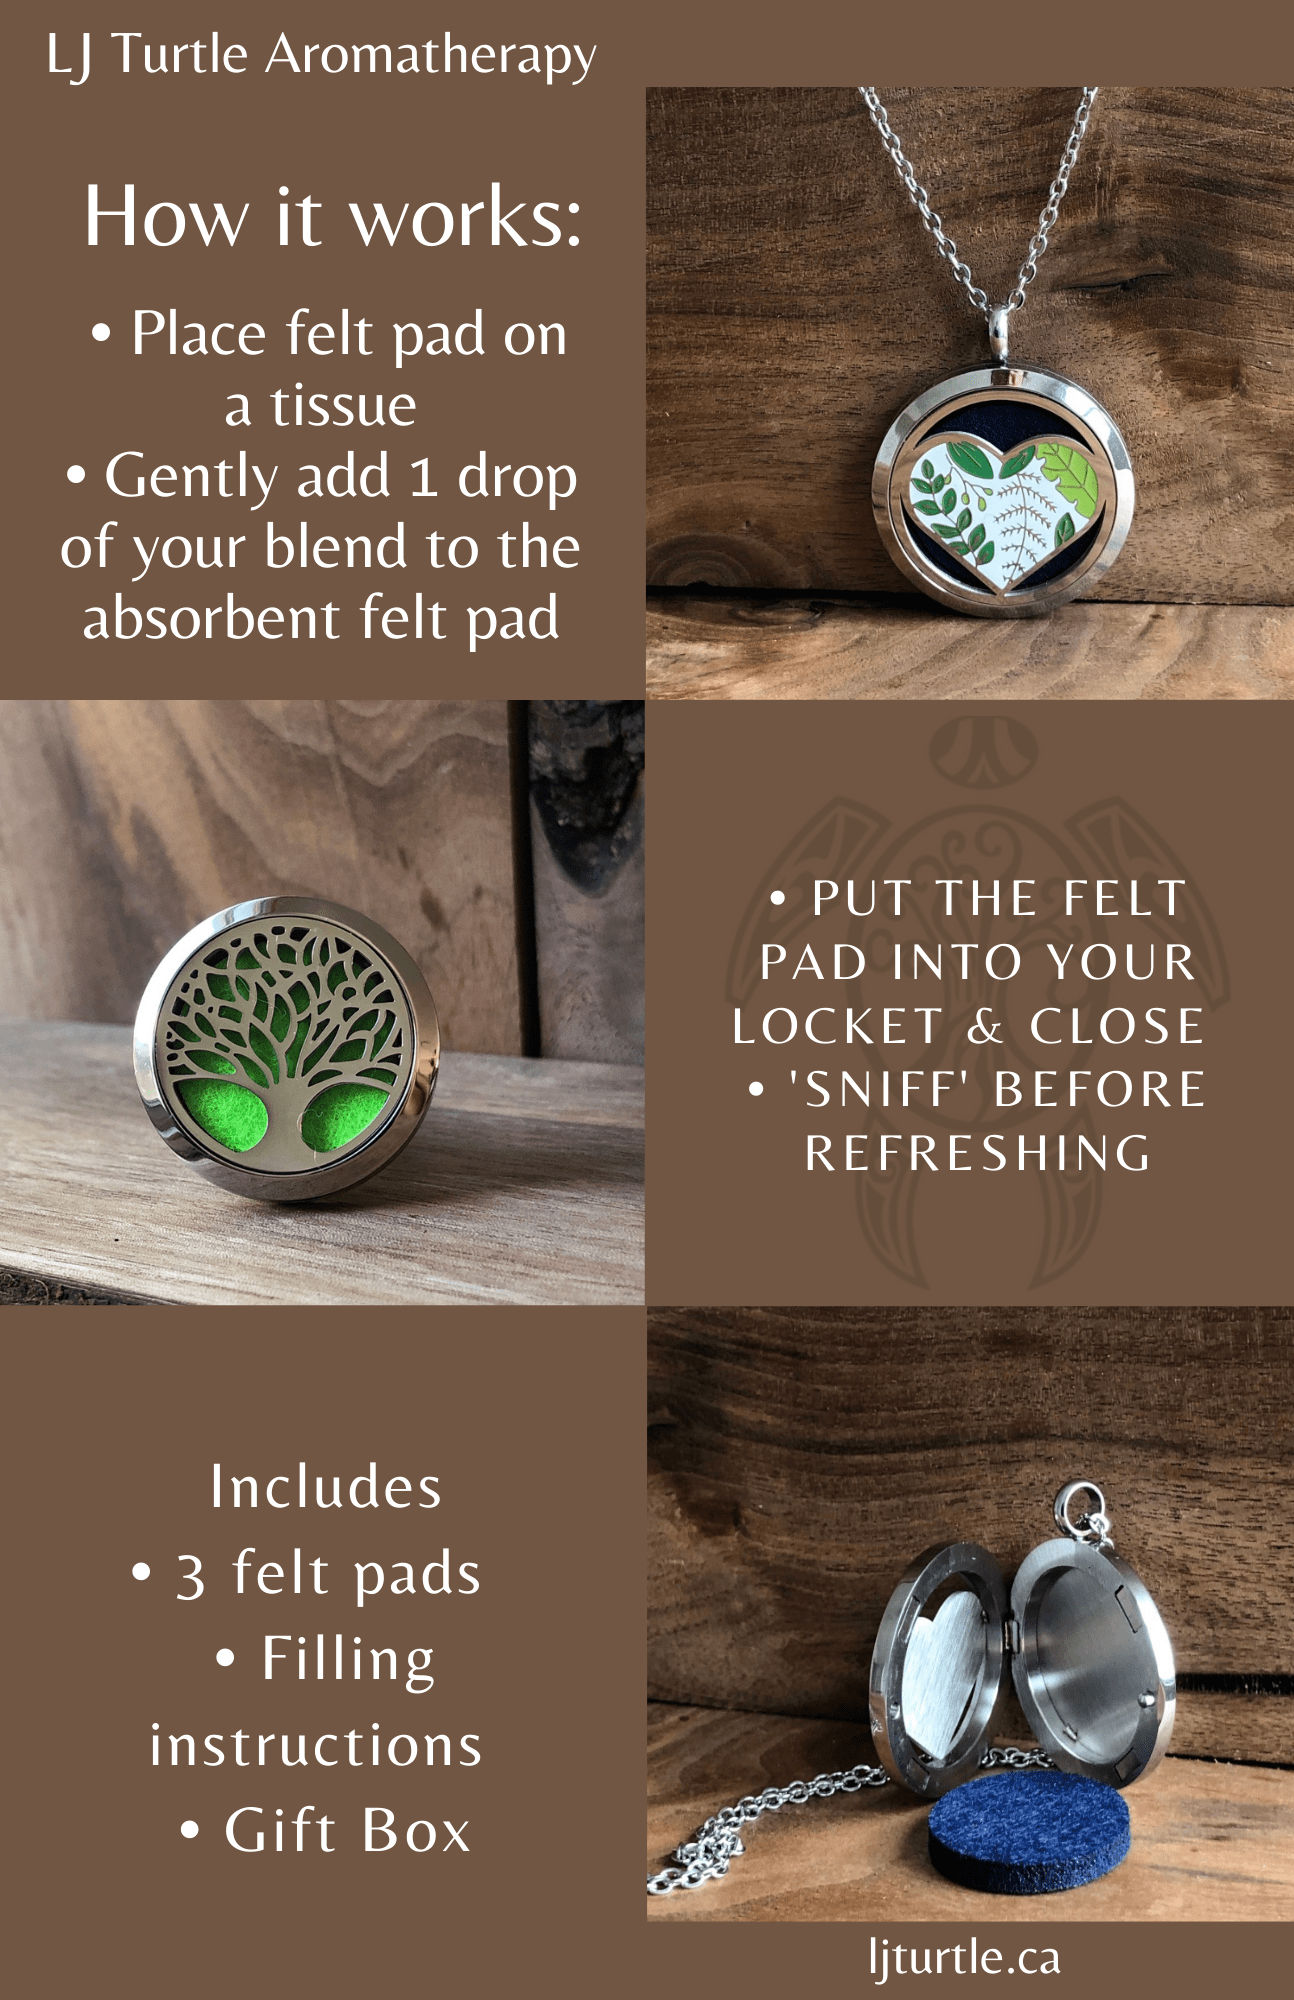 LJ Turtle Aromatherapy & Accessories Vehicle Air Fresheners Tree of Life | Stainless Steel Aromatherapy Car Diffuser